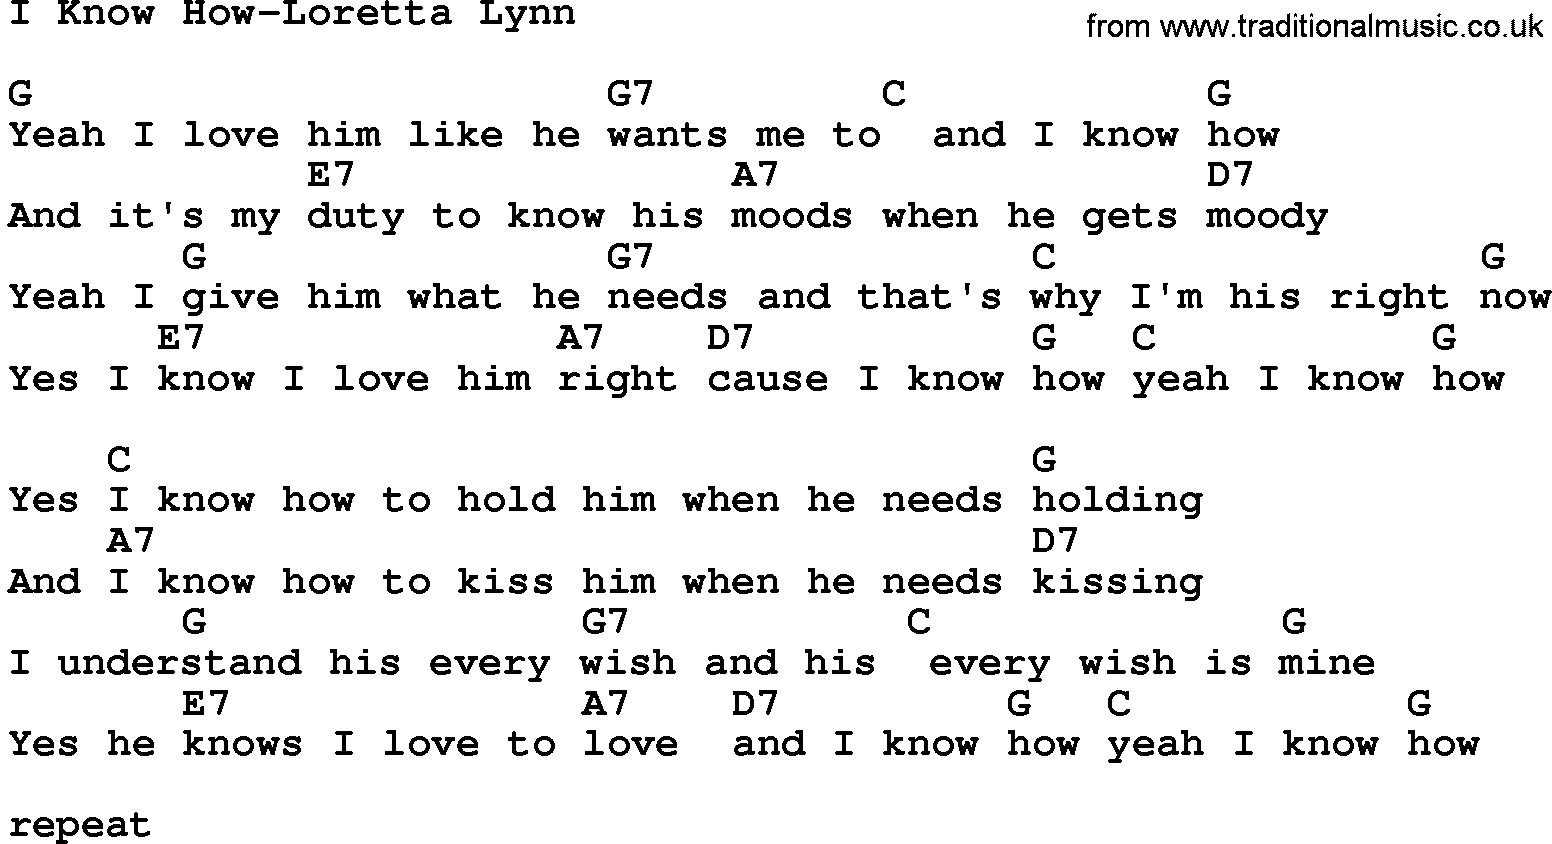 Country music song: I Know How-Loretta Lynn lyrics and chords